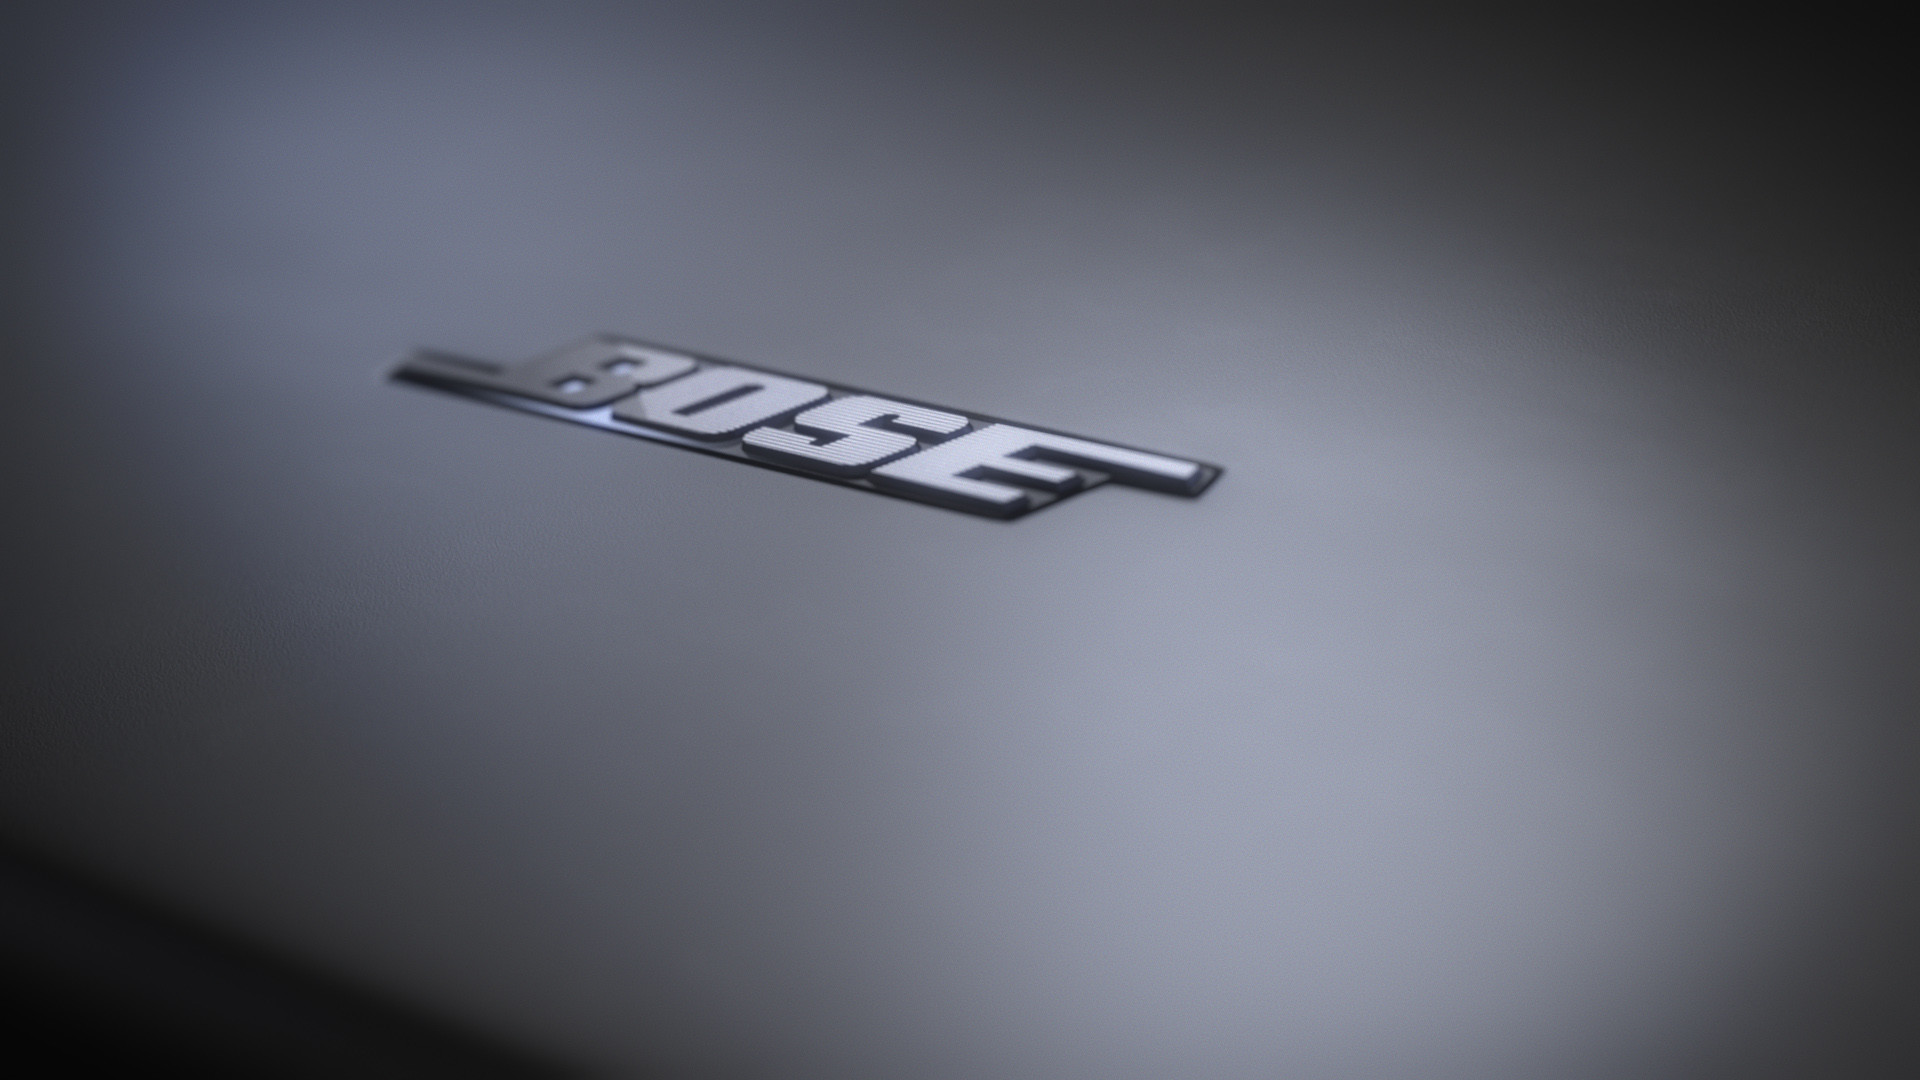 1920x1080 Bose Wallpaper Images - Reverse Search Bose - Home ...